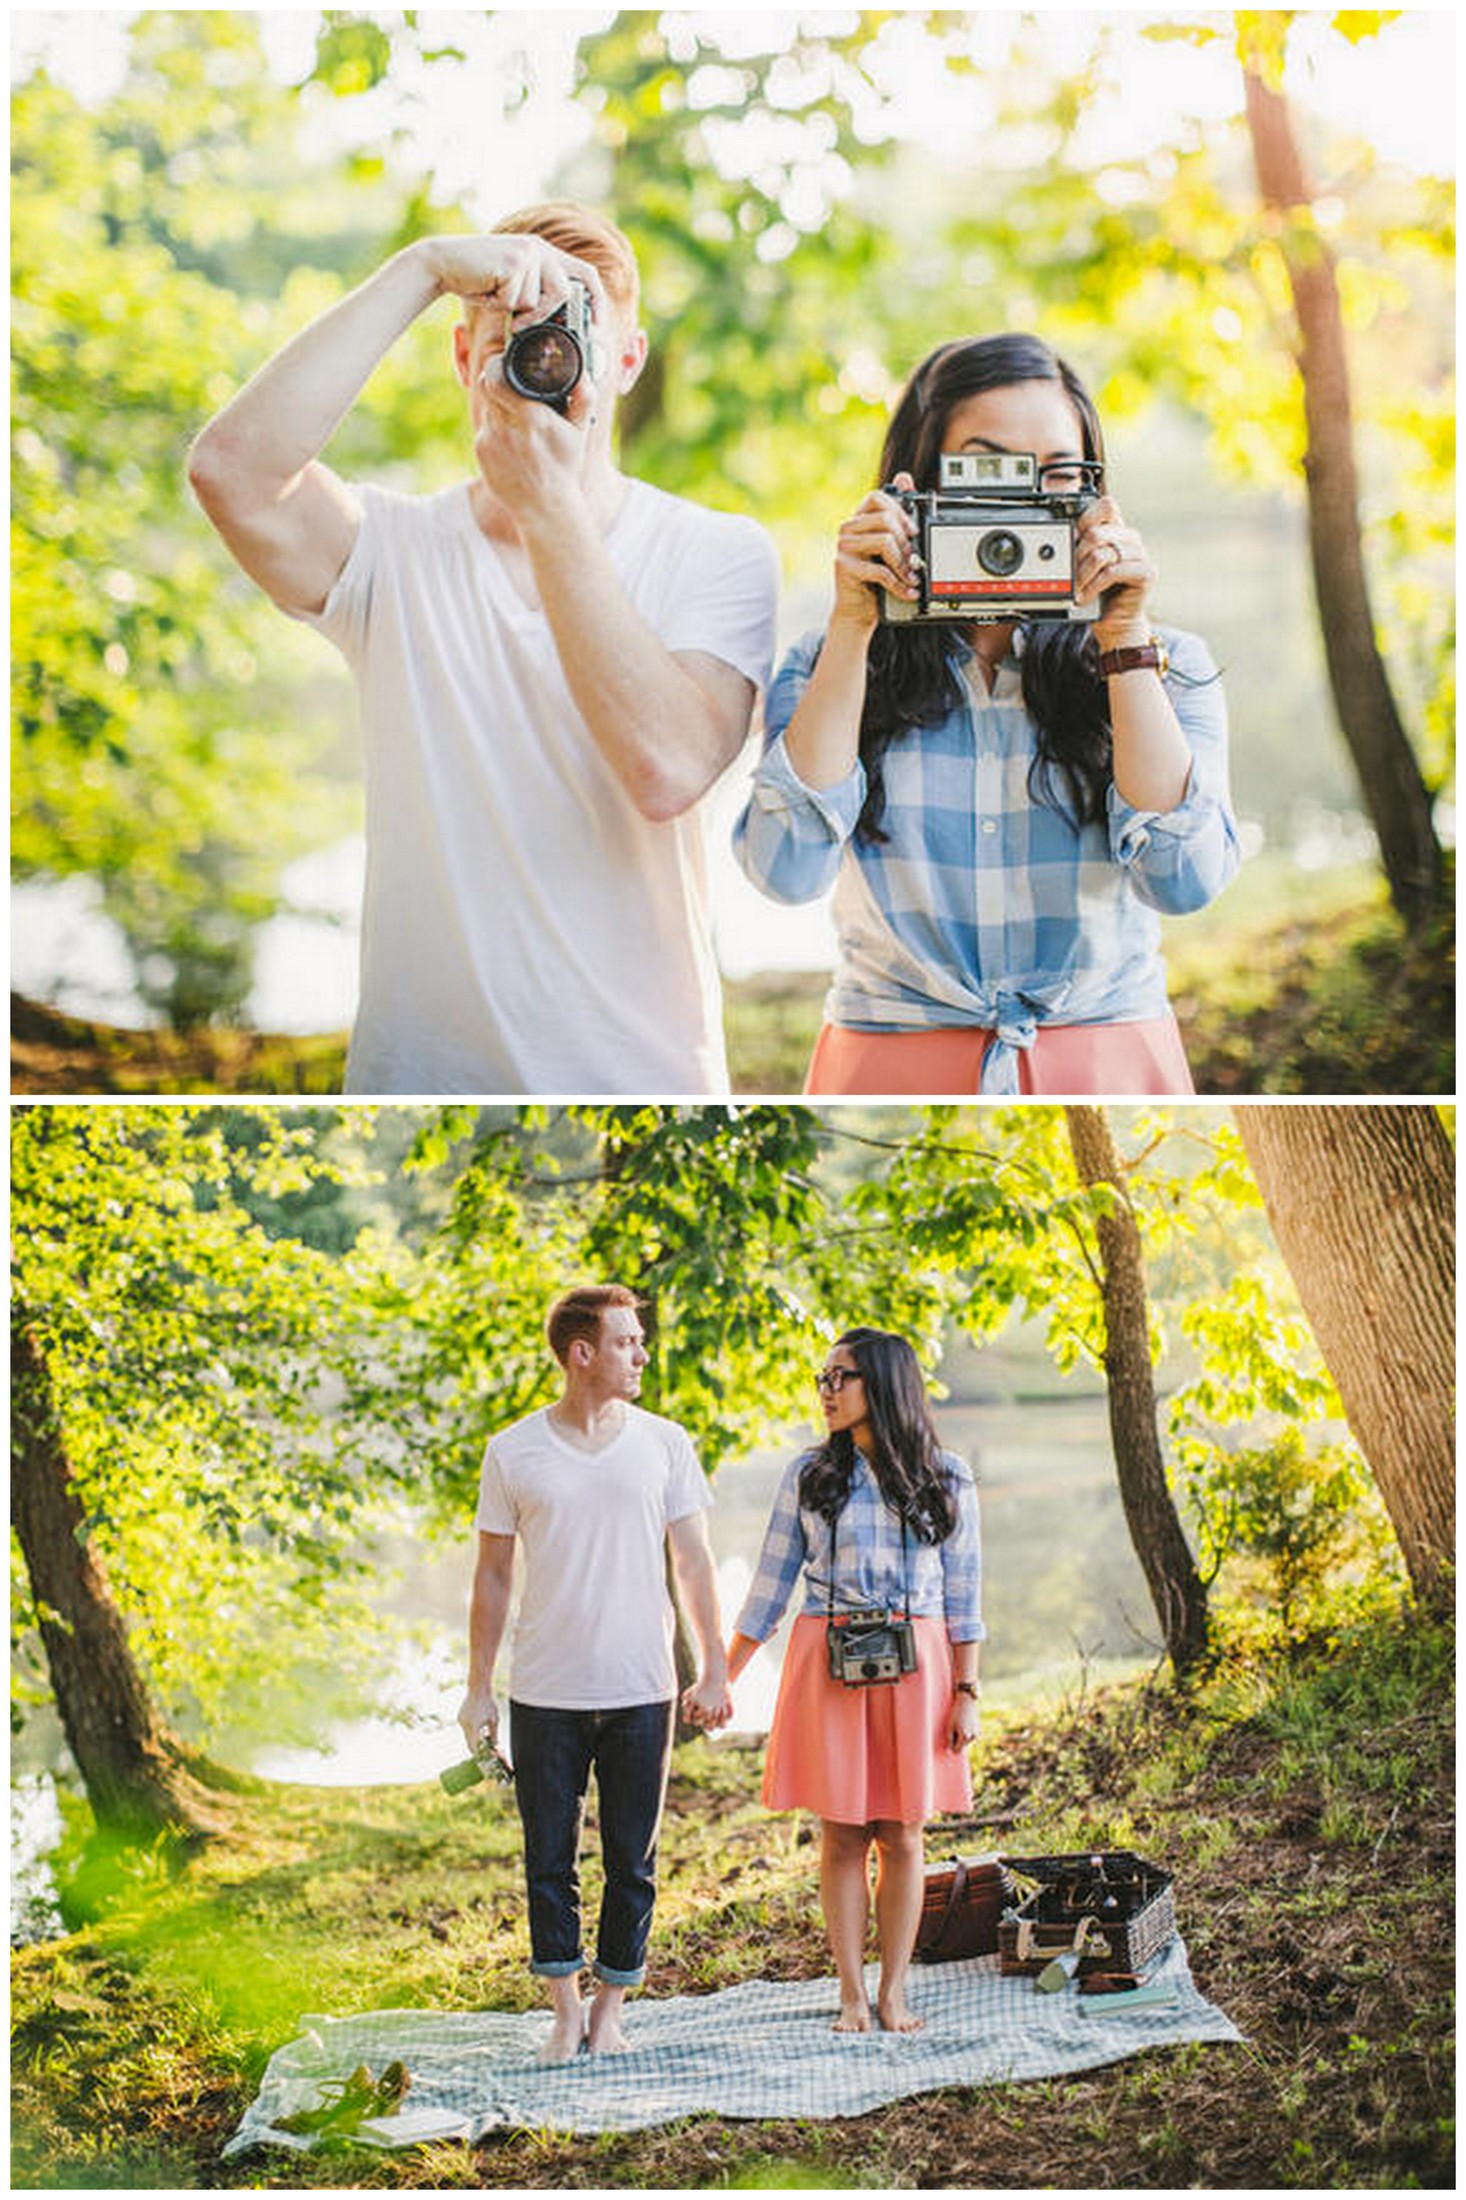 How to Rock your Engagement Photoshoot